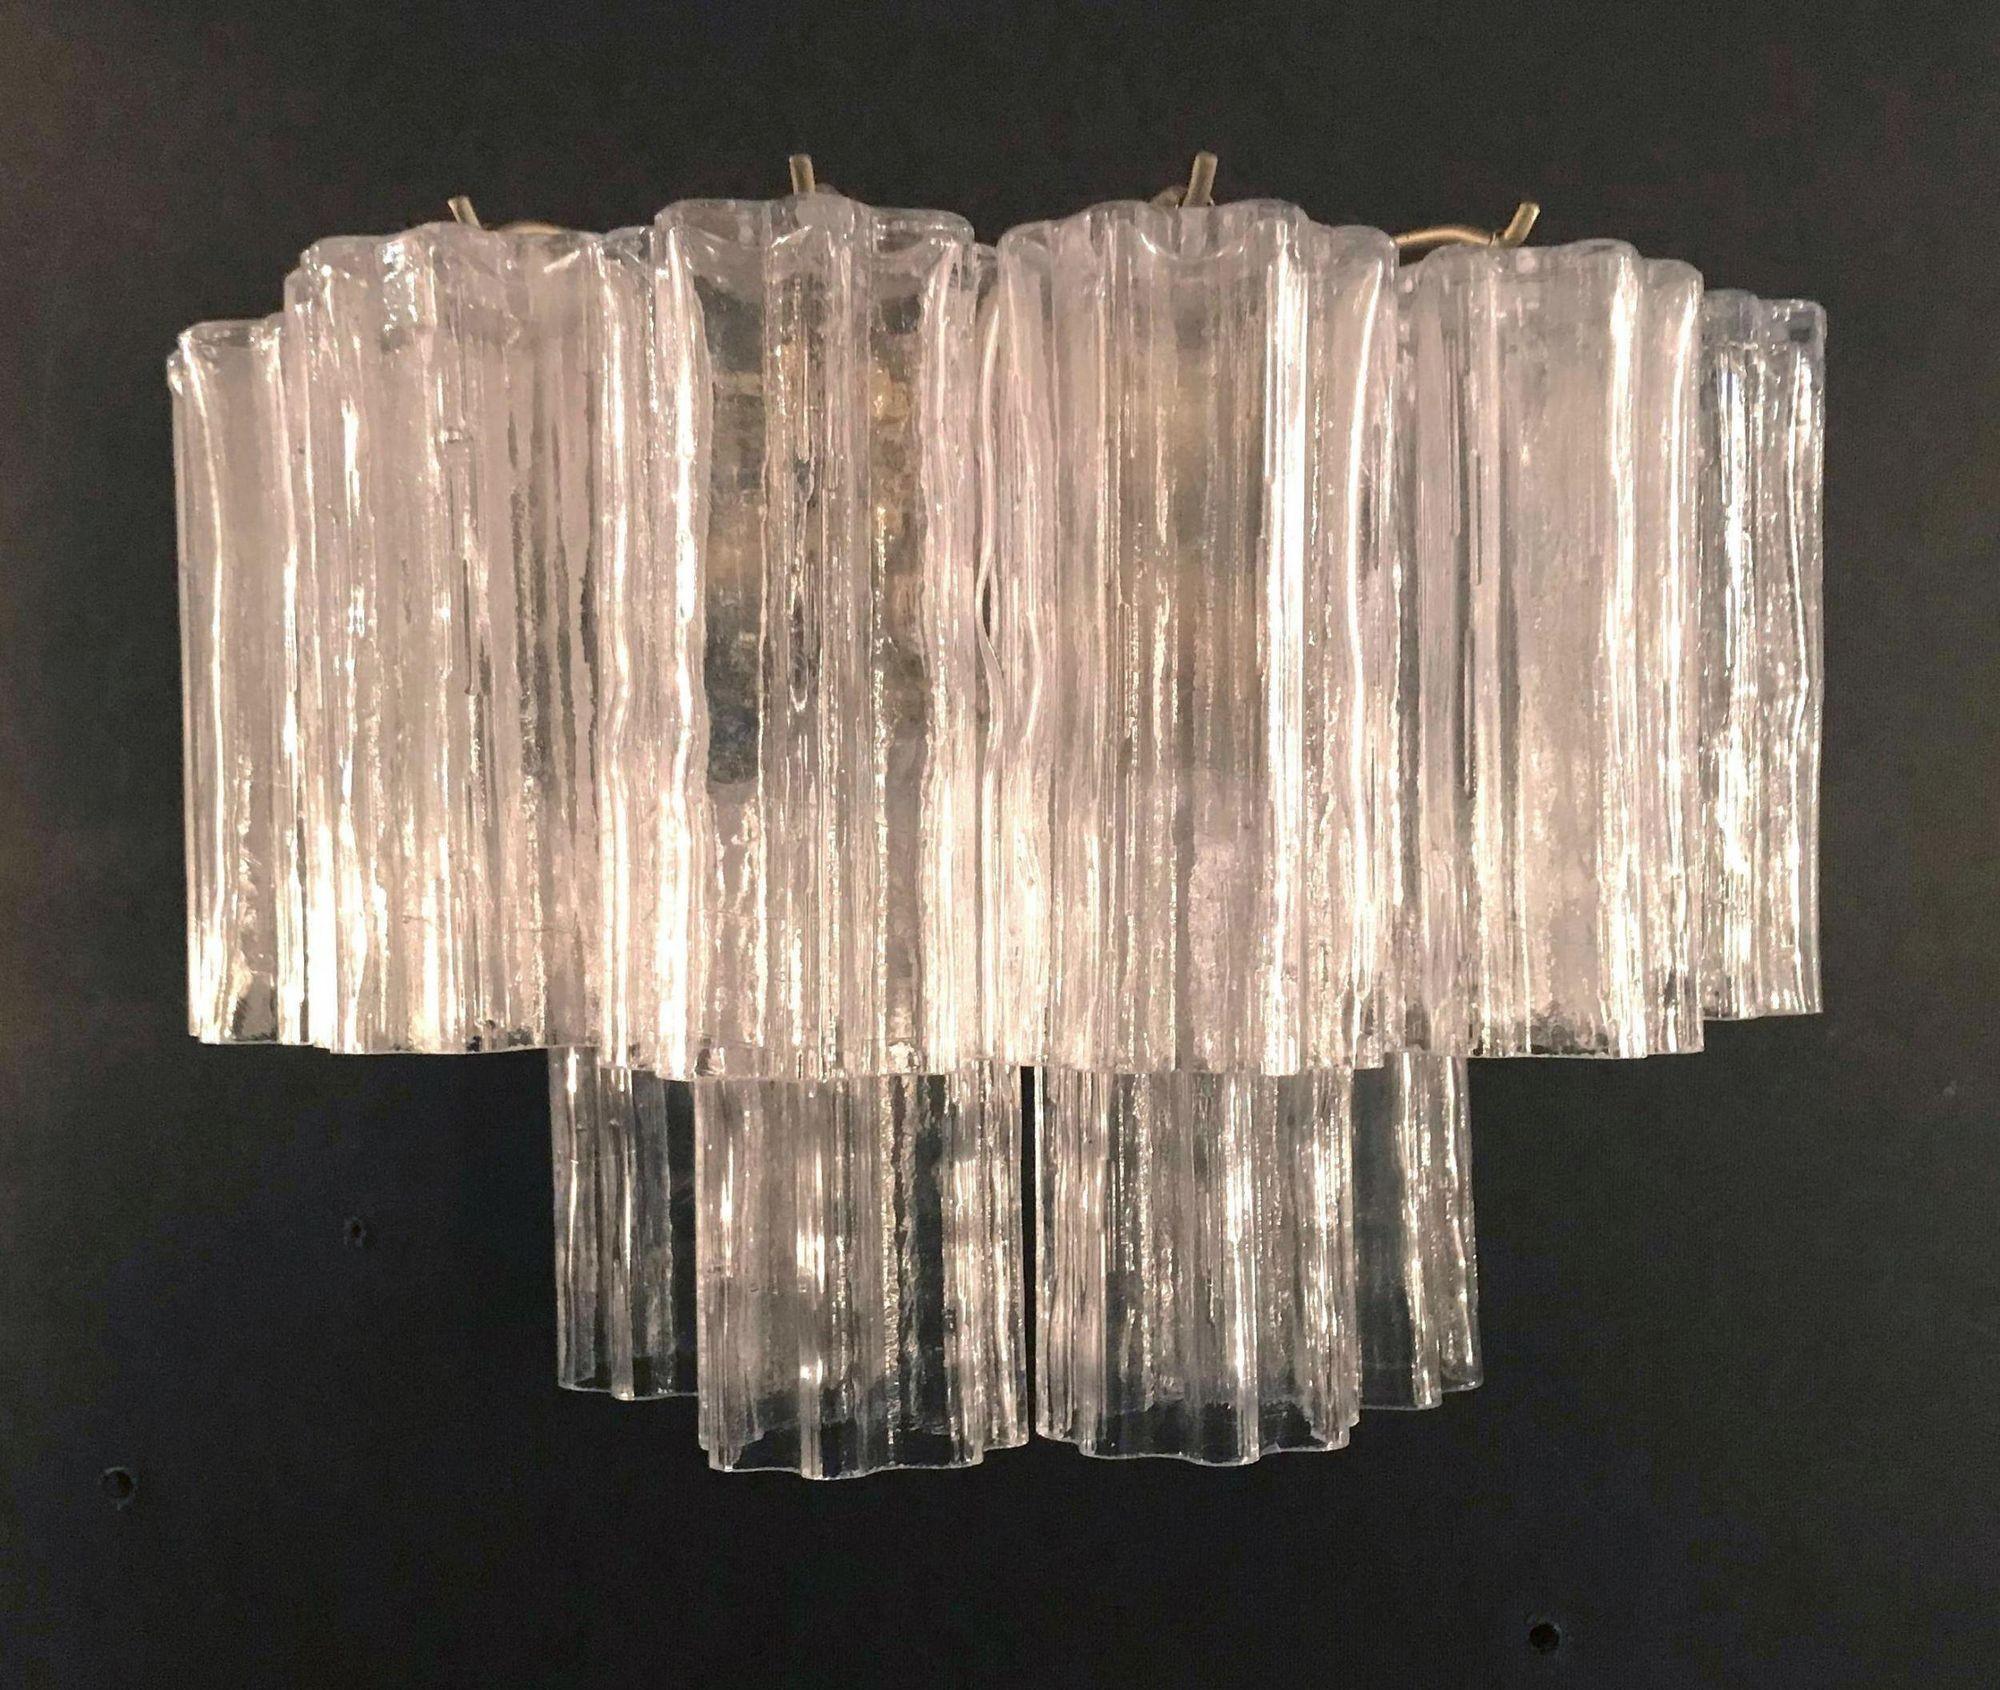 Vintage Italian Wall Lights with 12 clear murano glasses blown in Tronchi technique, mounted on antiqued gold metal frames, designed by Venini, circa 1960s. Made in Italy.